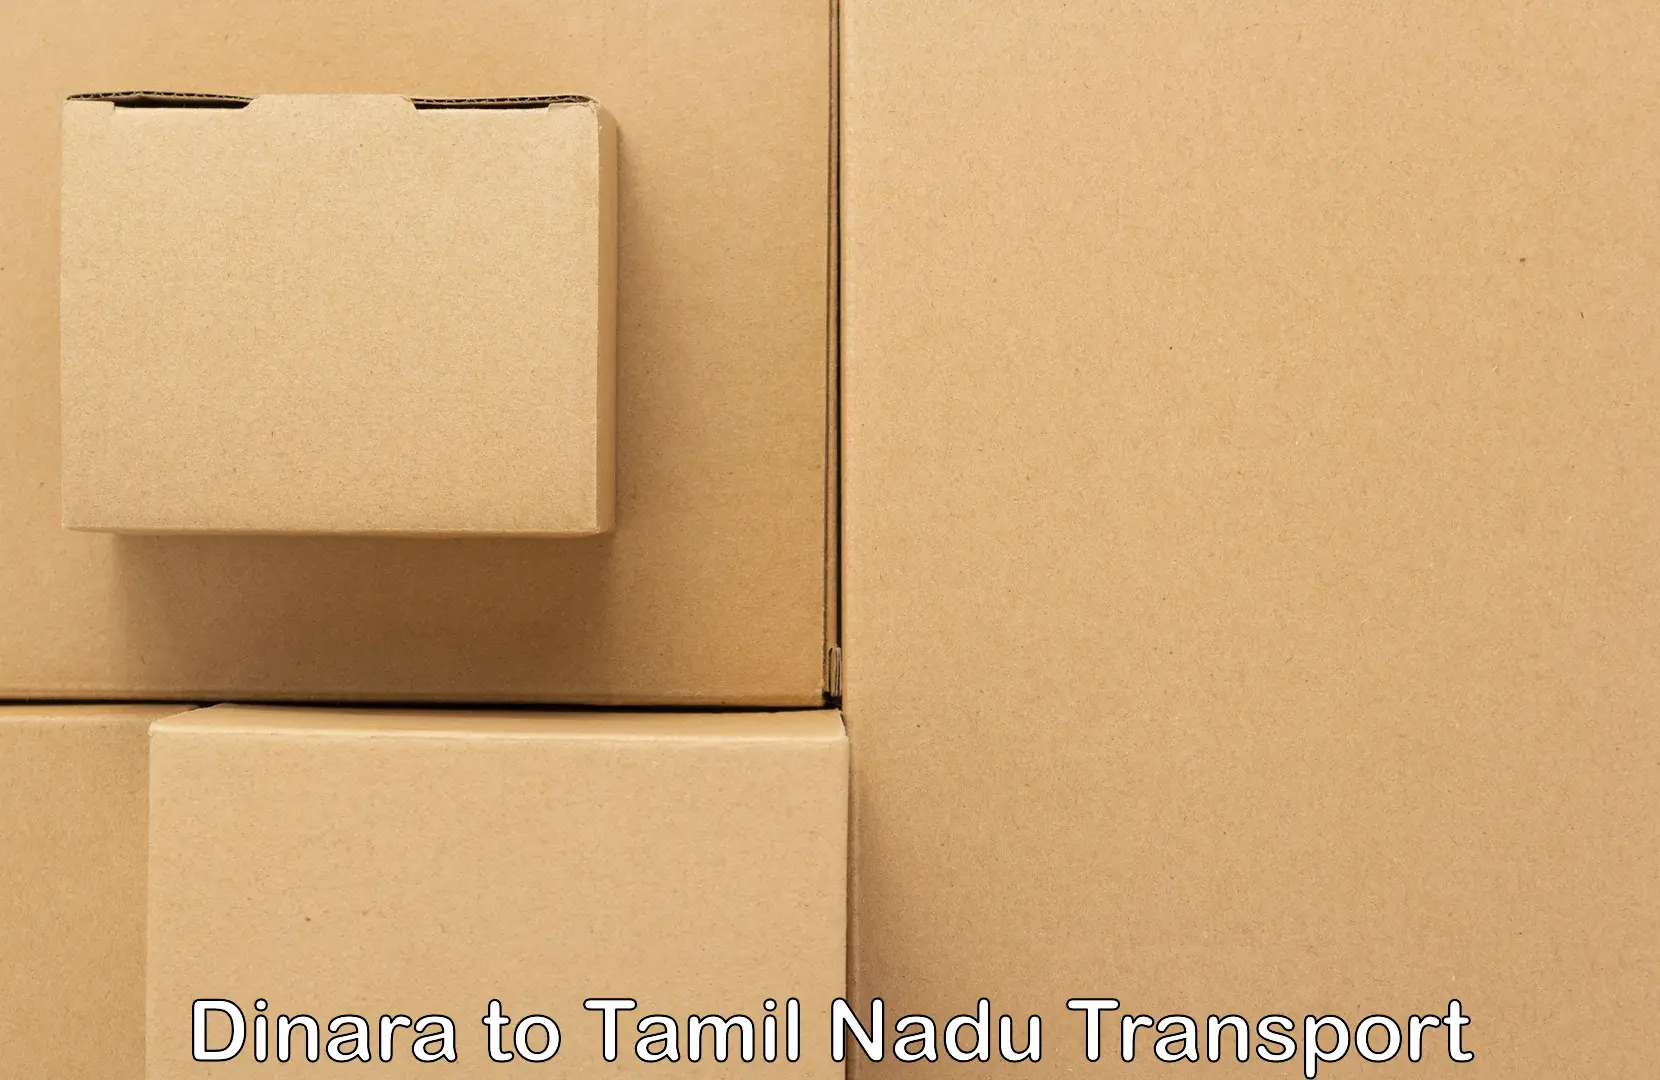 Nationwide transport services Dinara to Ennore Port Chennai